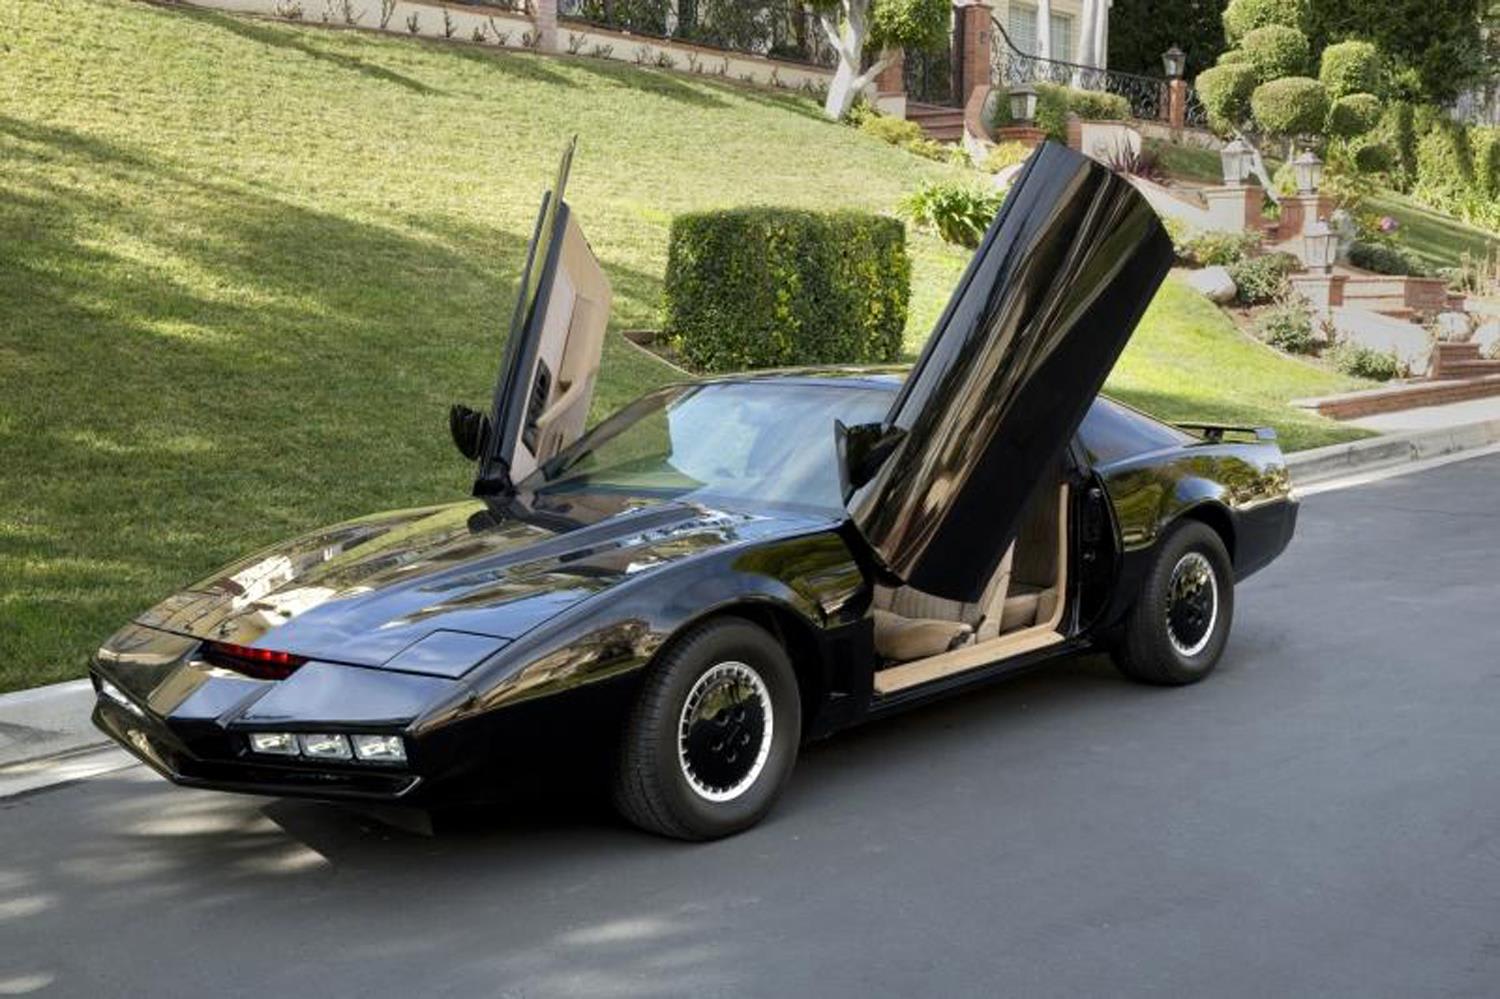 Hasselhoff Auctions Replica of 'Knight Rider' Car.